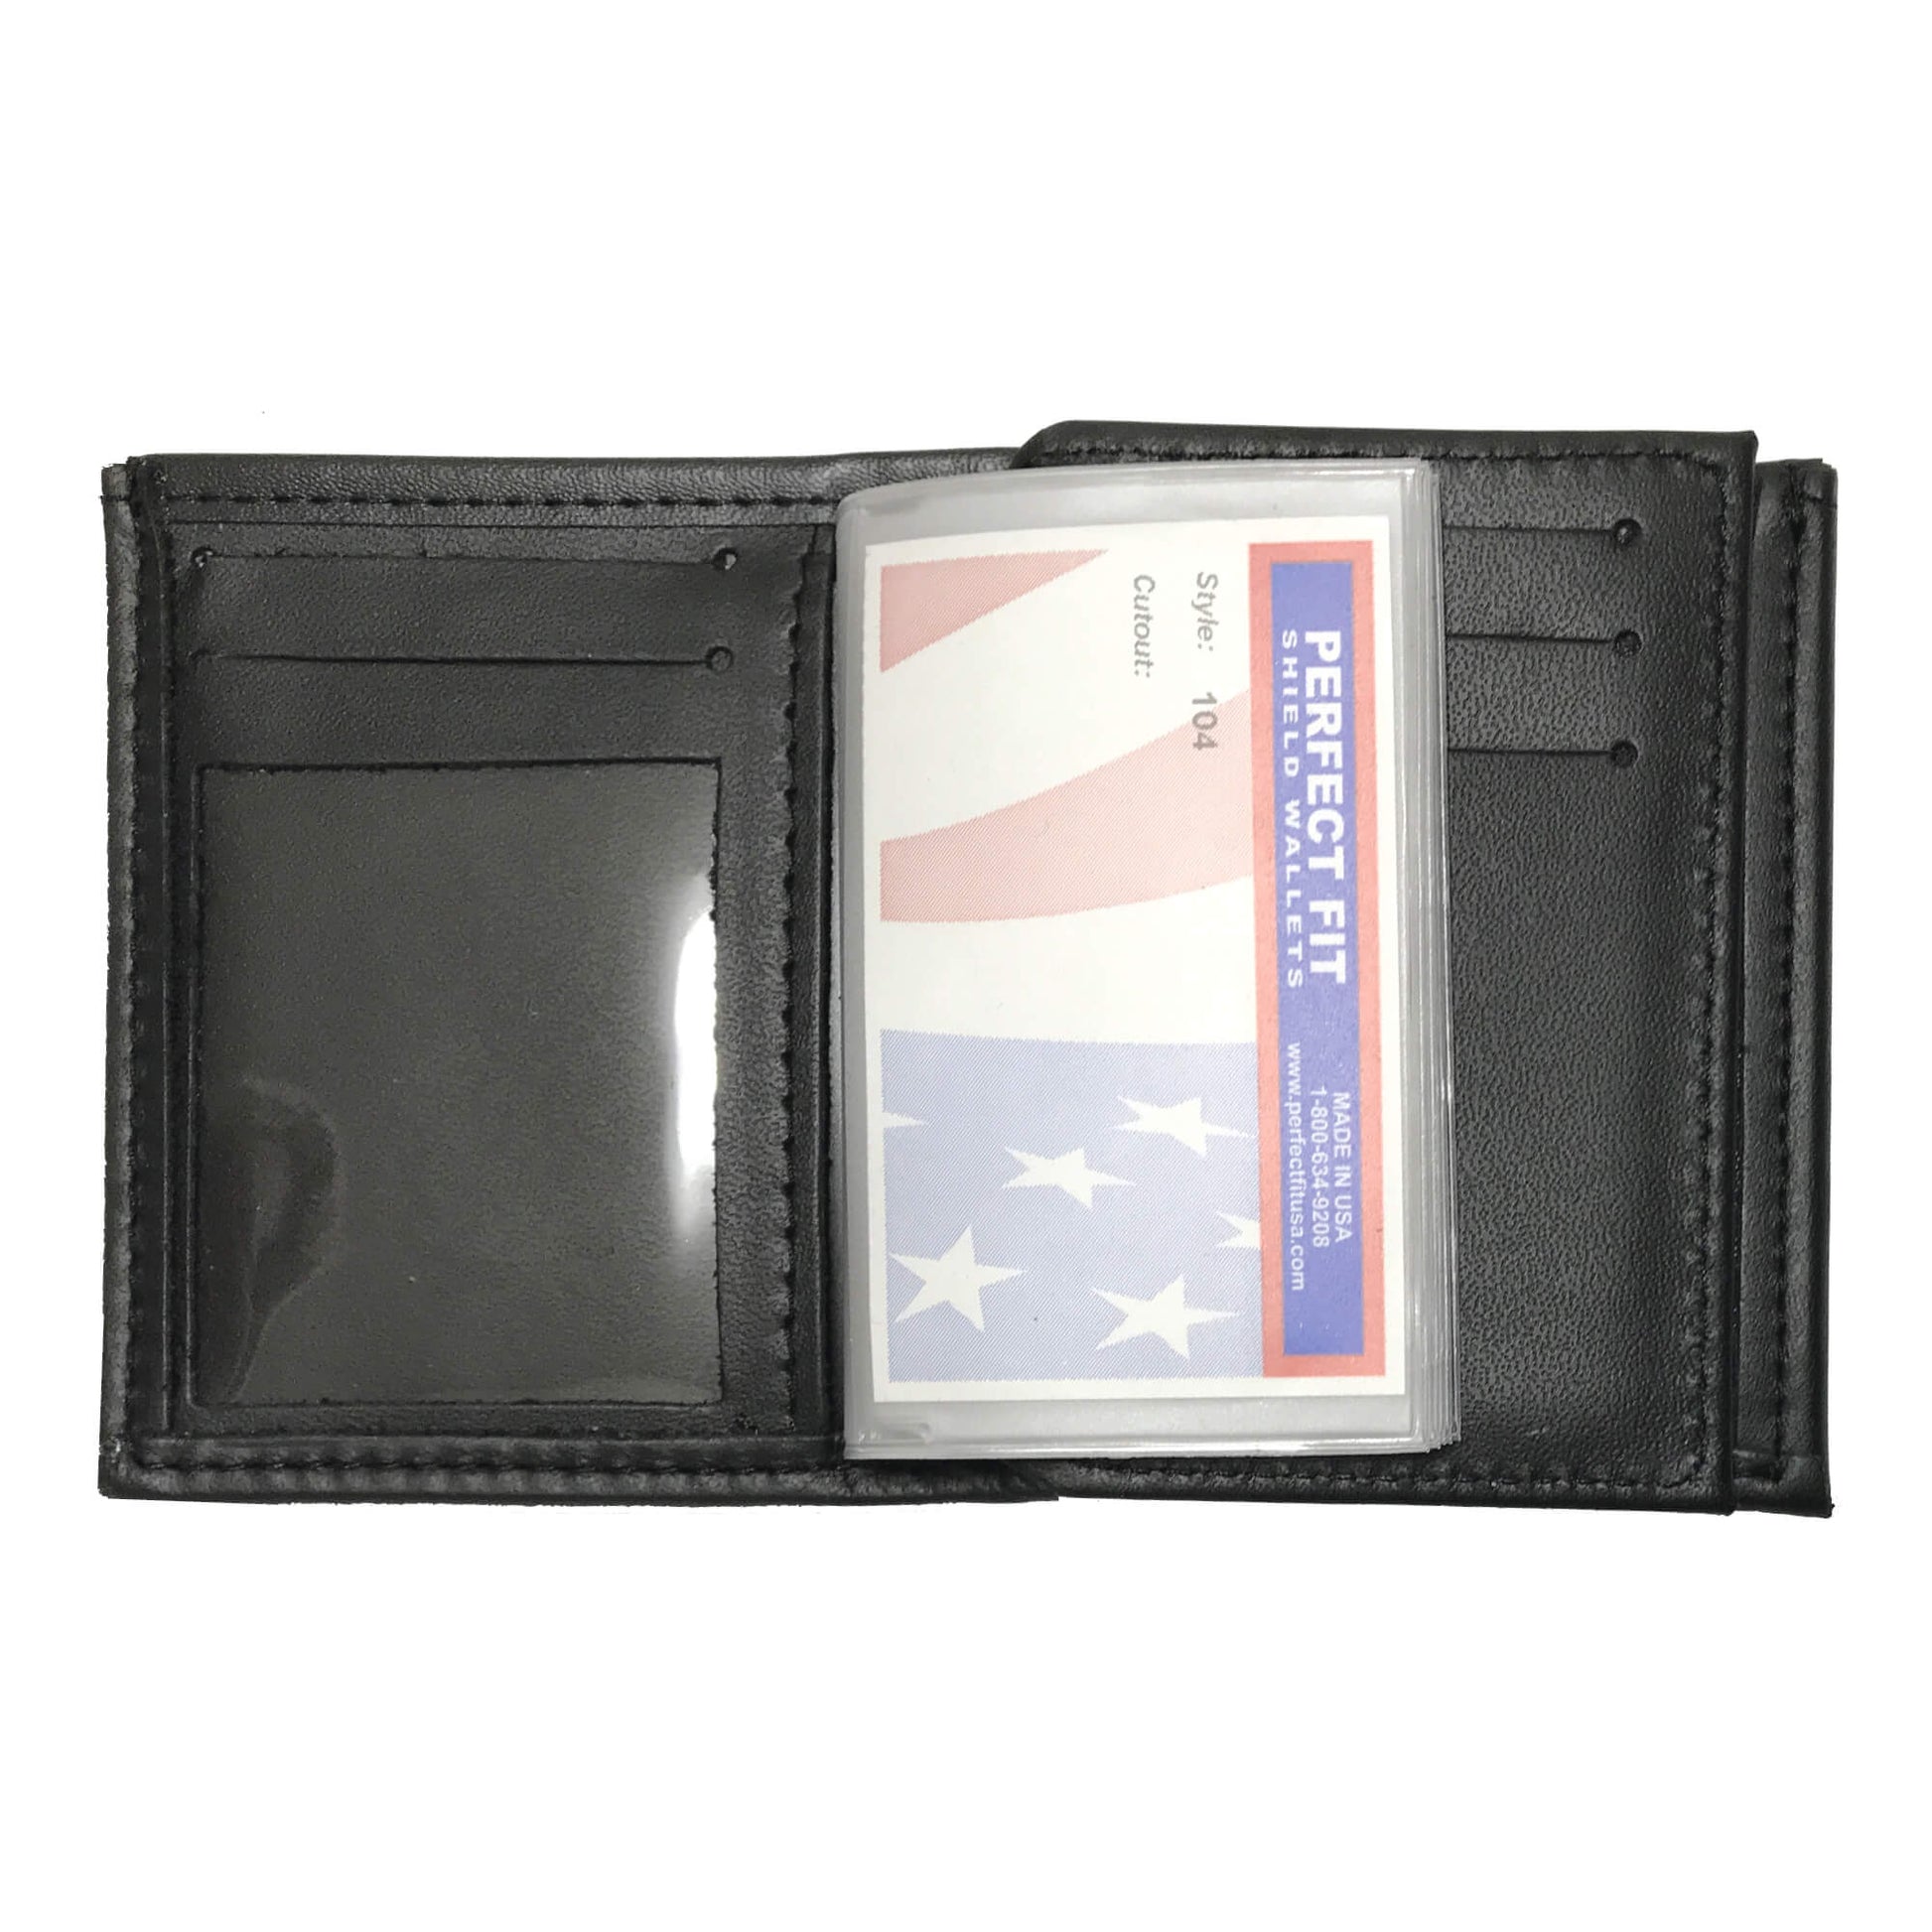 New York Police Dept. (NYPD) SGT Bifold Hidden Badge Wallet-Perfect Fit-911 Duty Gear USA